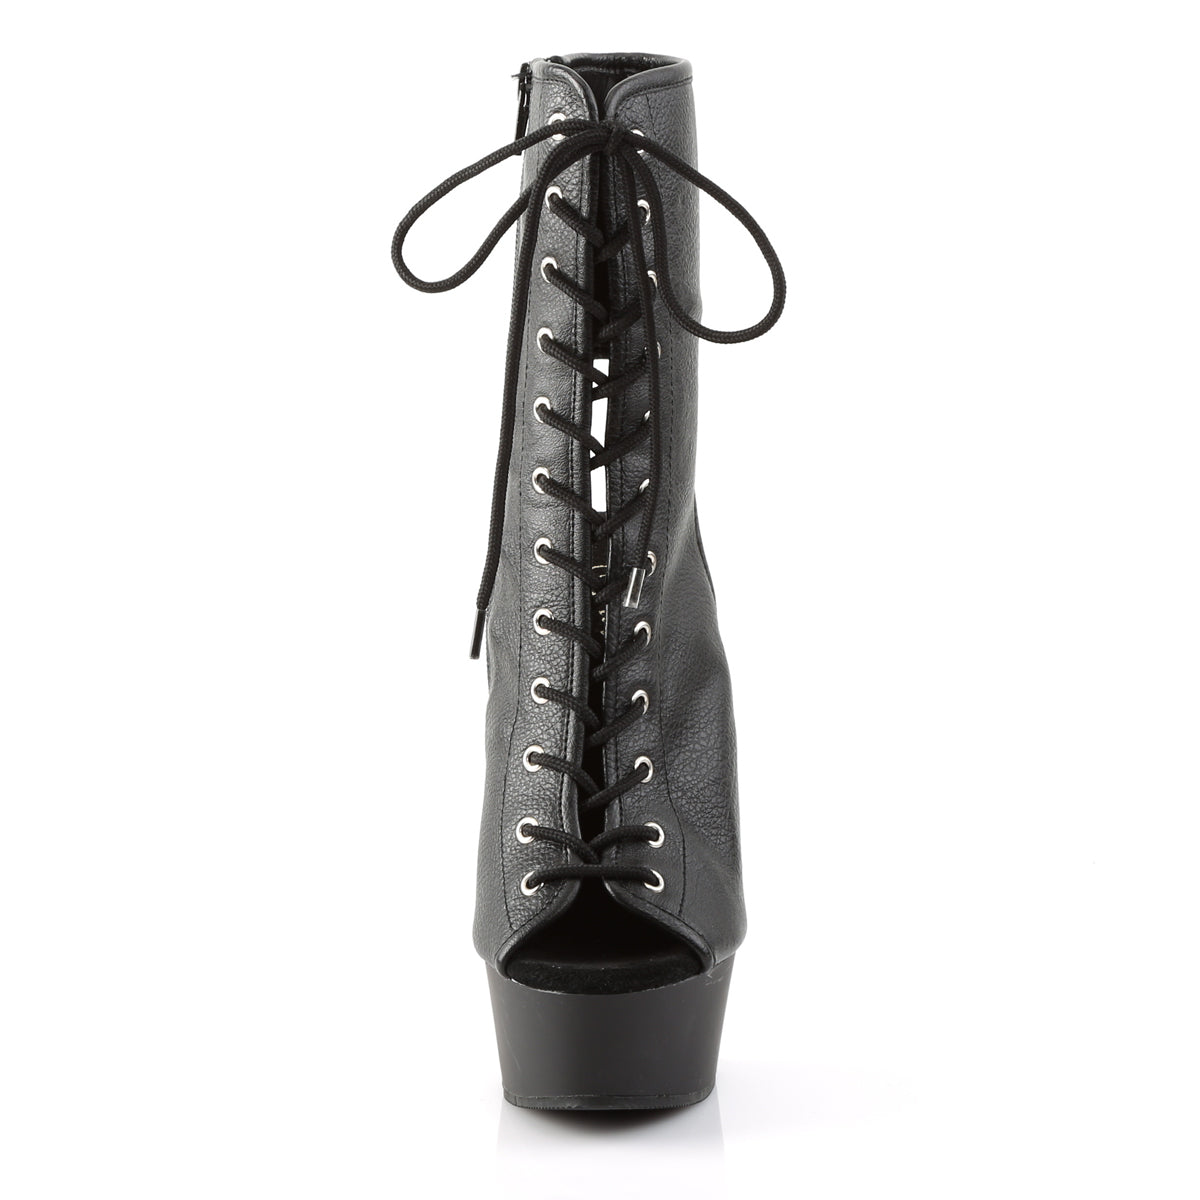 DELIGHT-1016 Black Faux Leather Boot Pleaser